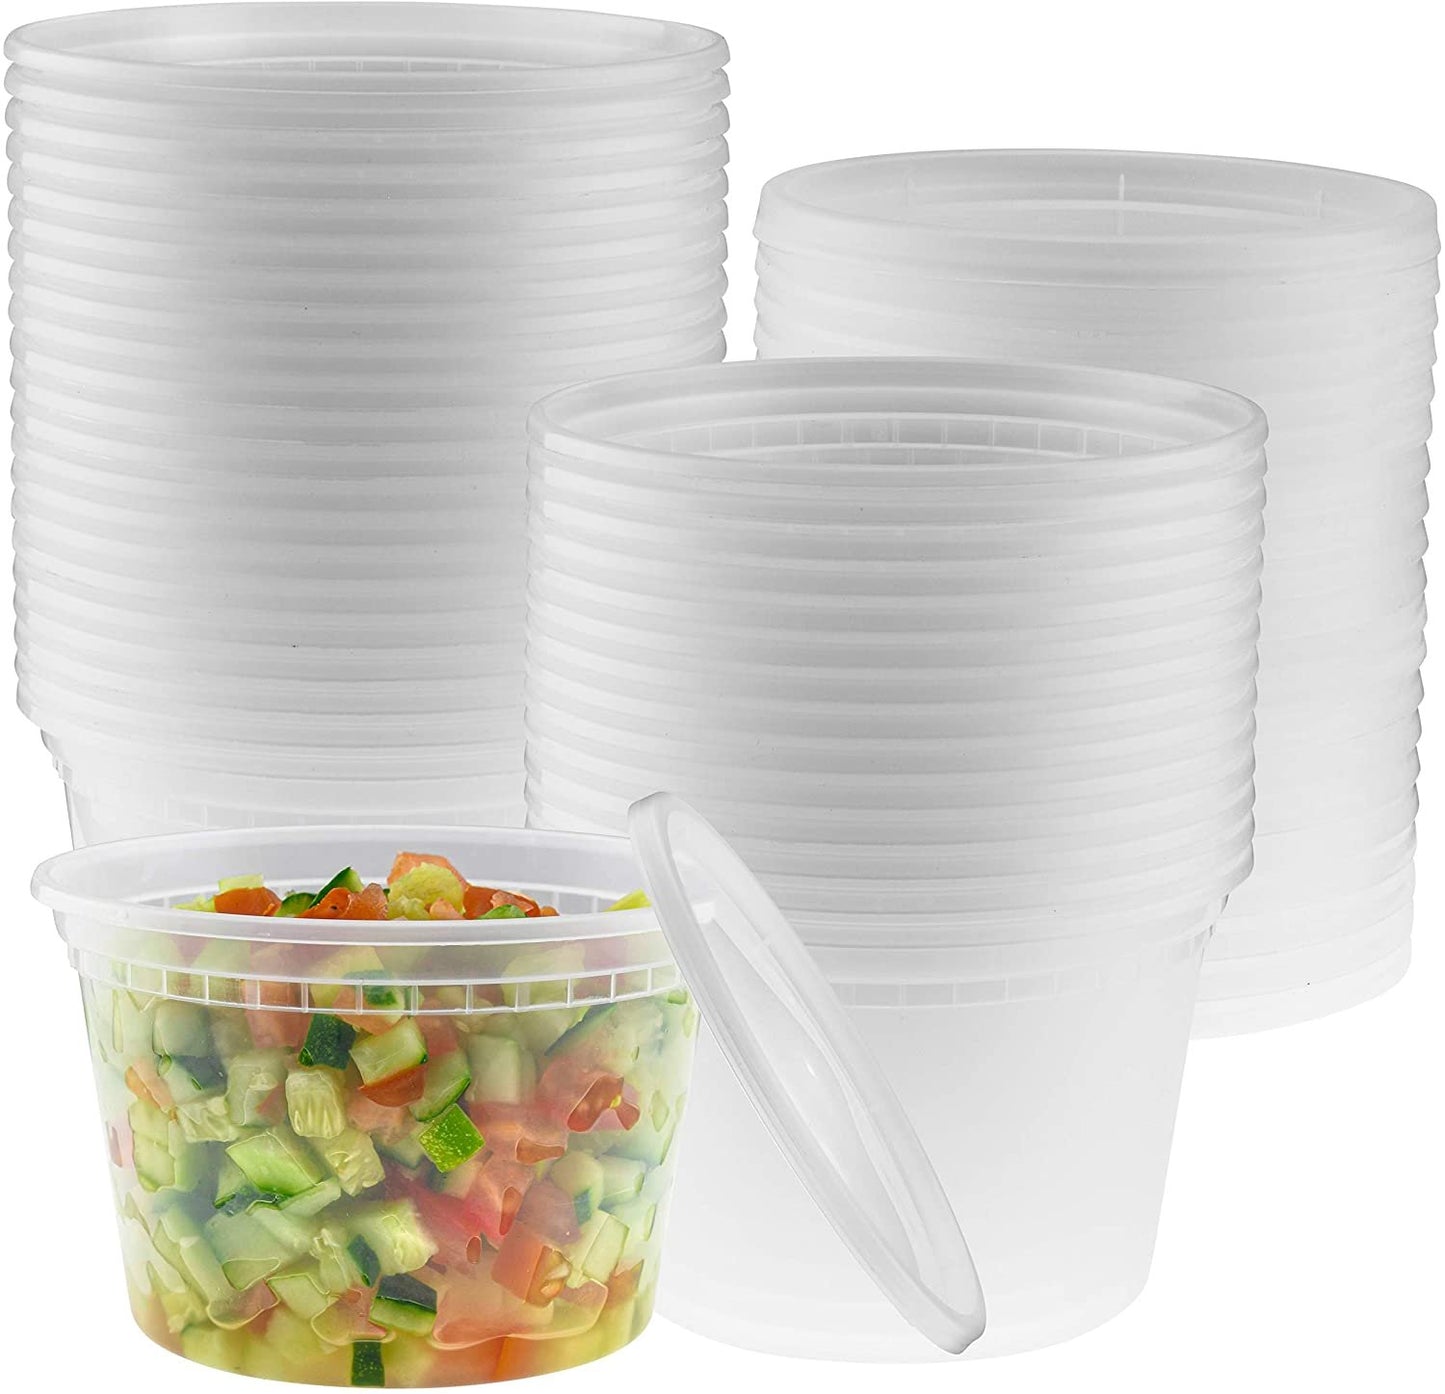 [168 Pack] 26oz Heavy Duty Food Storage Containers with Lids - Leakproof Deli Soup Containers with Lids - Slime, Meal Prep, Take Out, Stackable